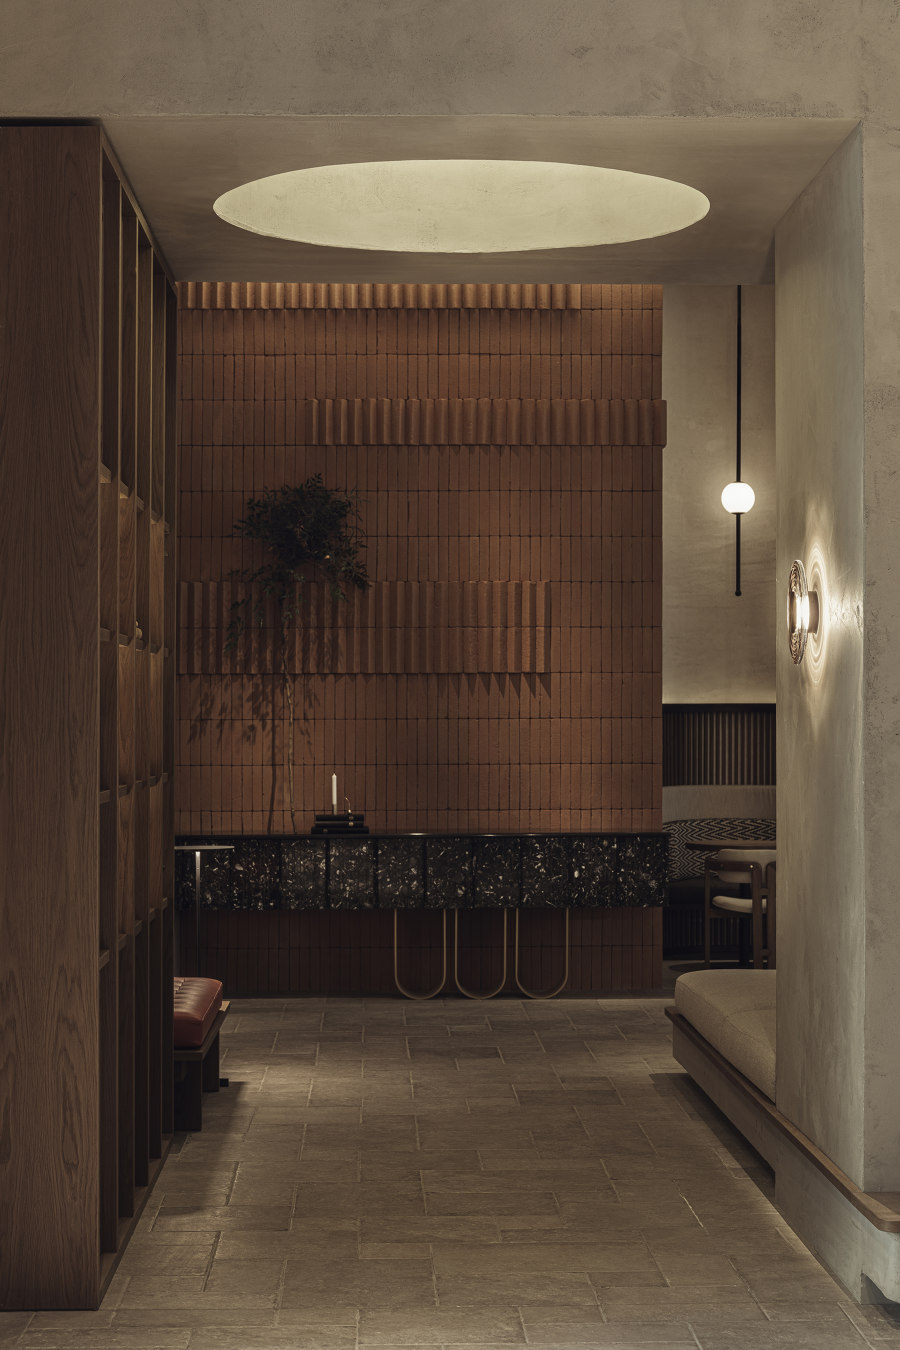 MonAsty Autograph Collection by NaNA (Not a Number Architects) | Hotel interiors